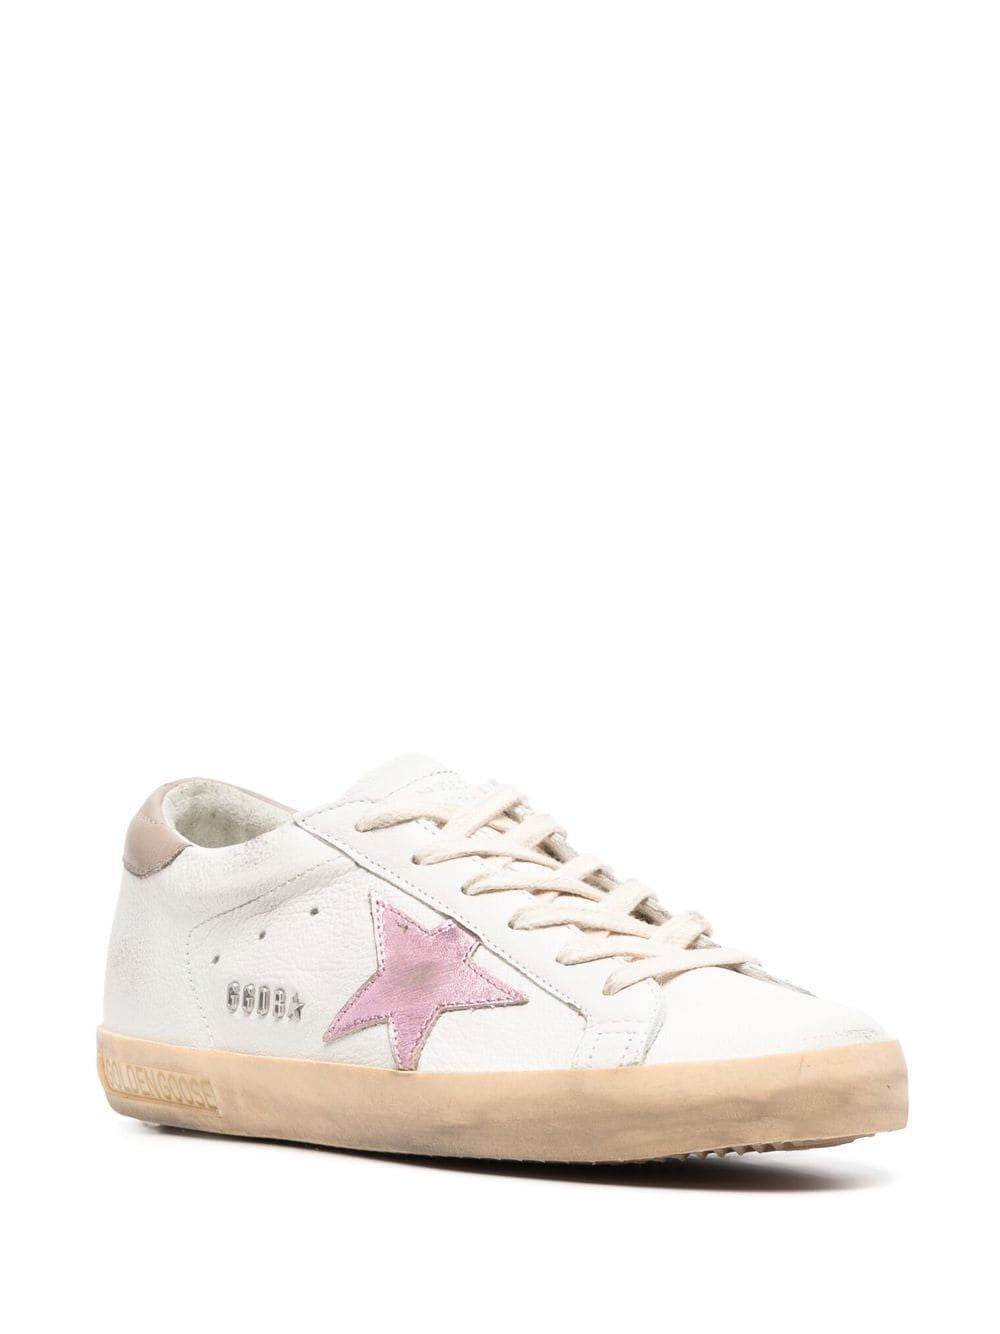 GOLDEN GOOSE Genuine Calf Leather Superstar Sneakers for Women - FW23 Collection